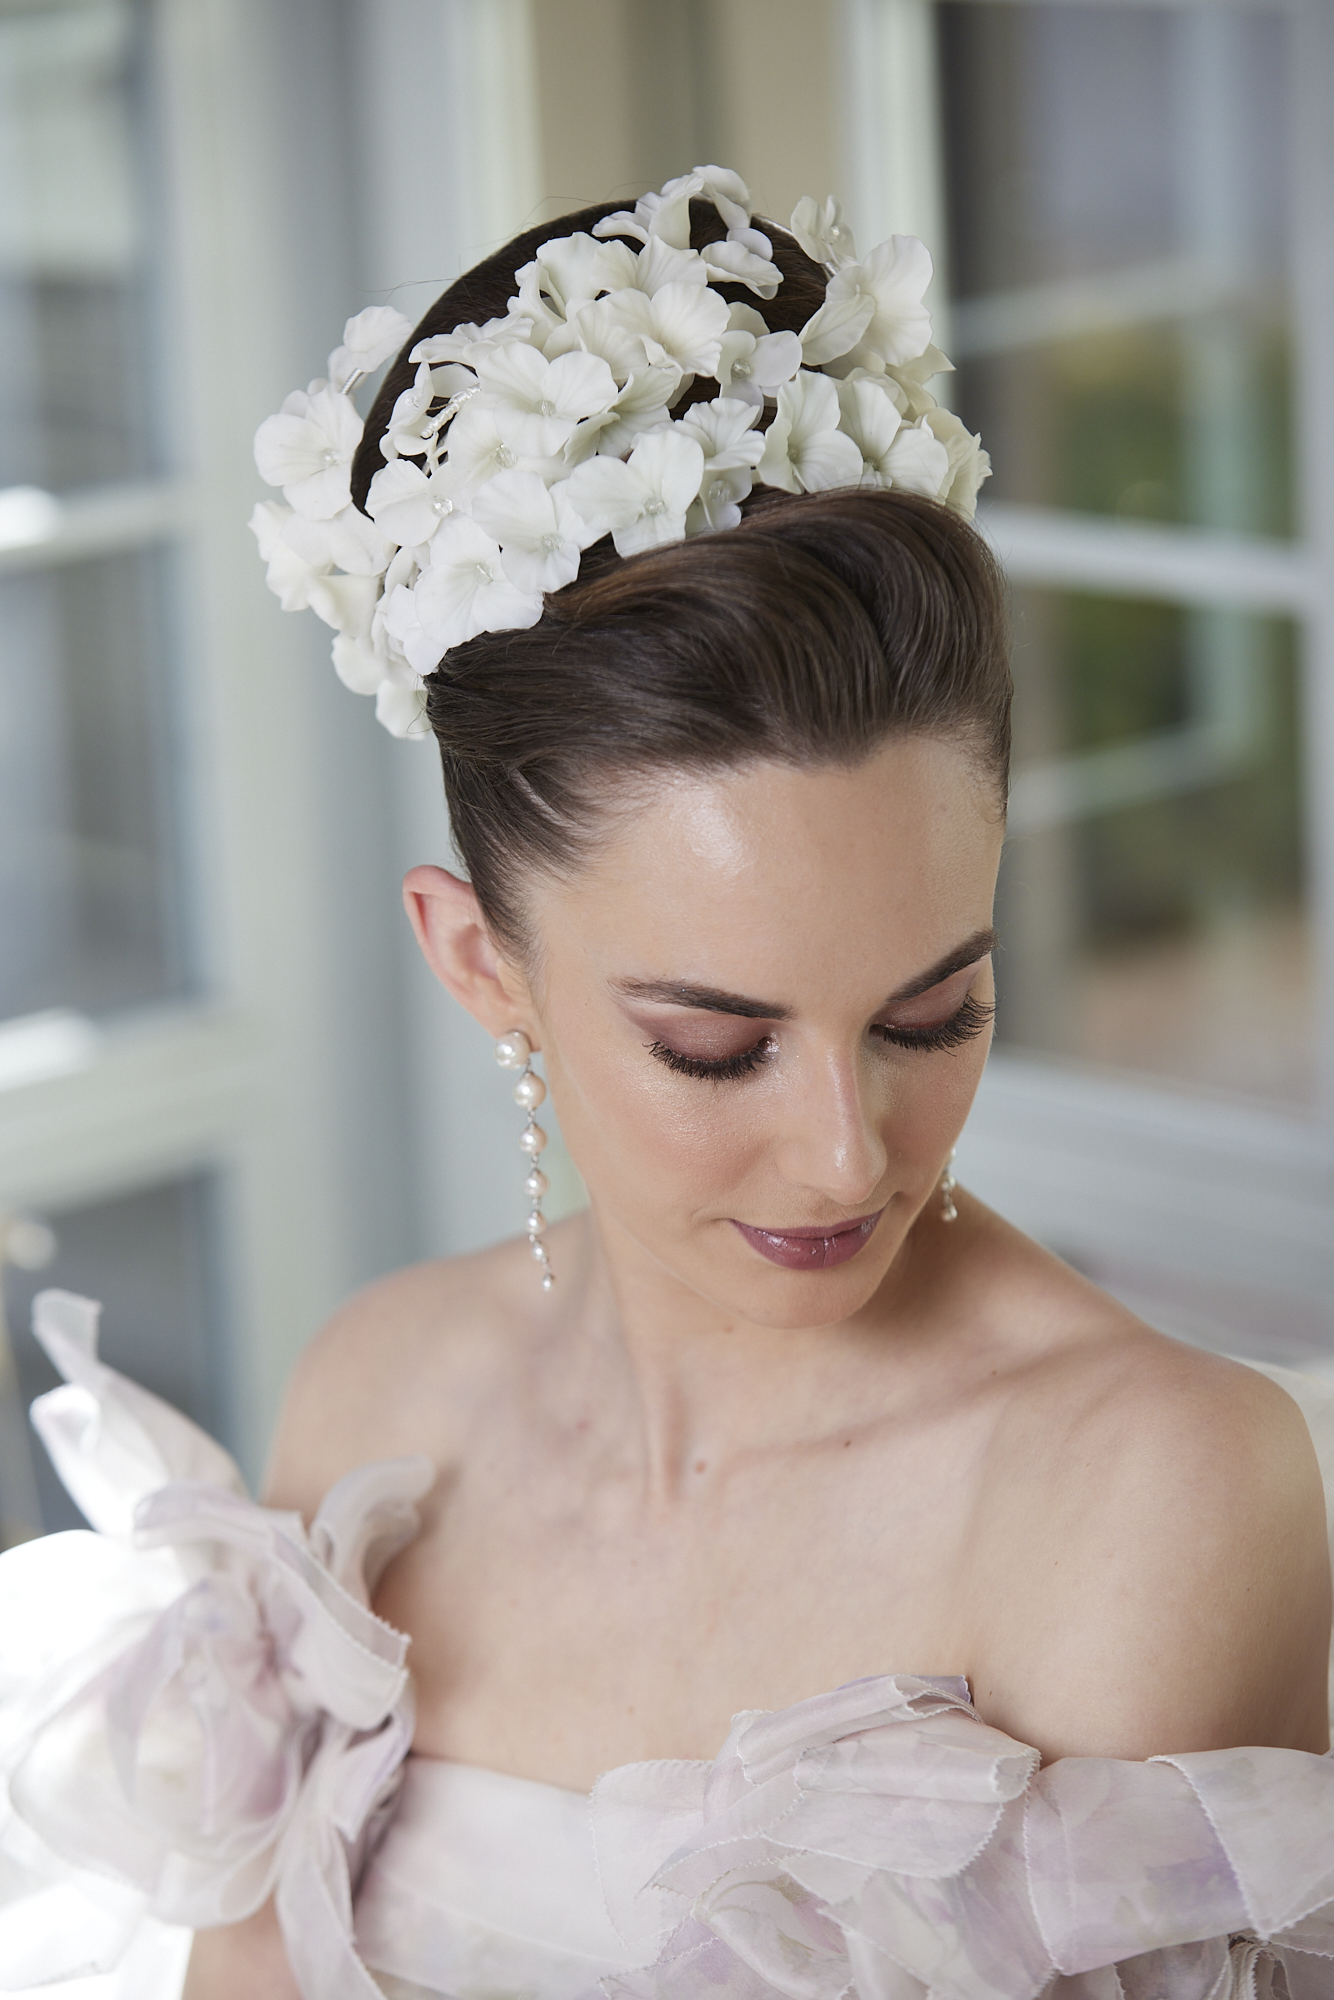 Is a Messy Bun For Wedding Hairstyle popular? Messy bun hairstyle is  something that can go with any outfit whether that is traditional or western  wear. you just need the right technique